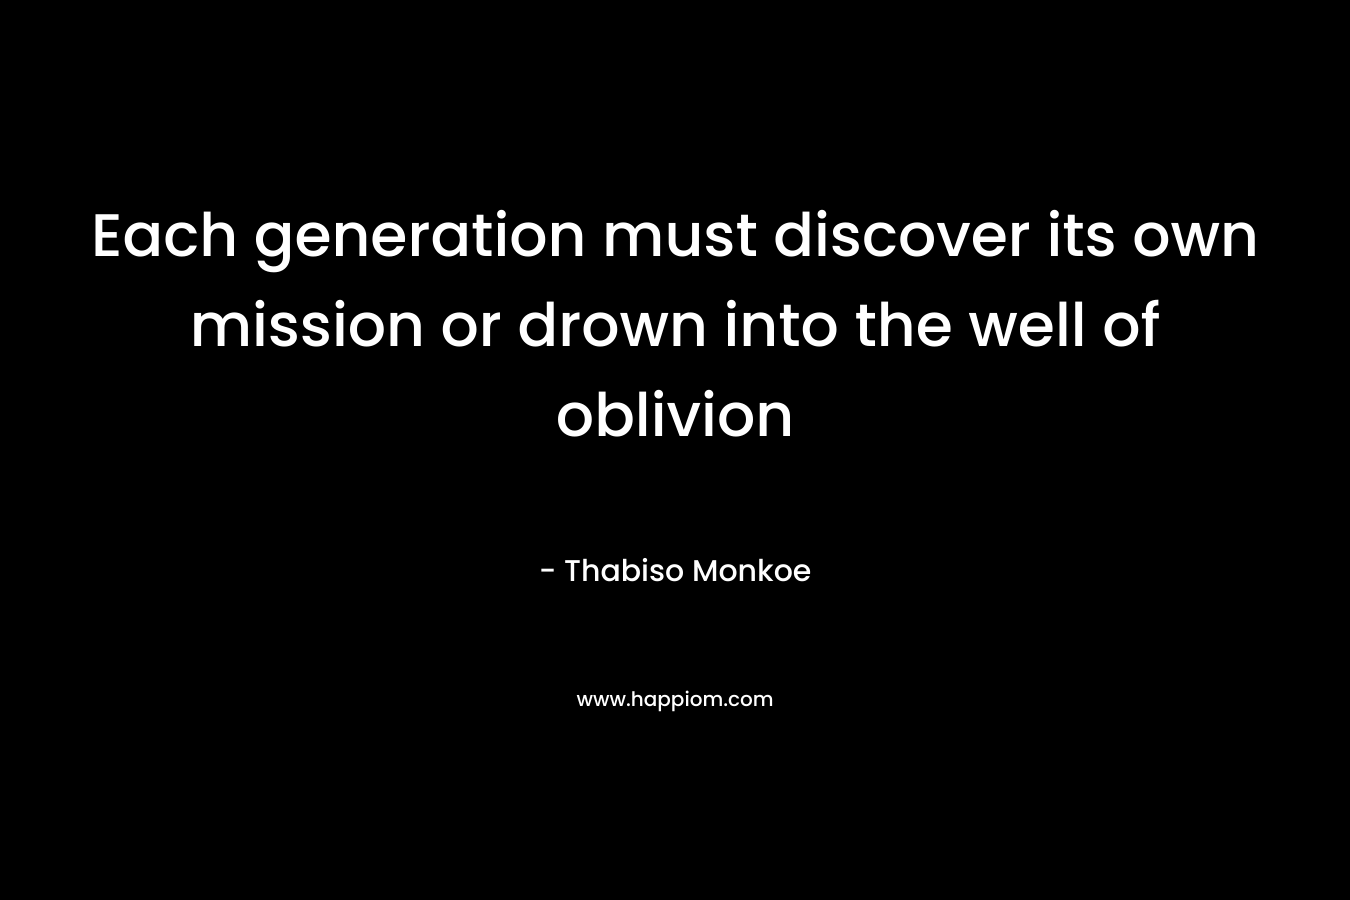 Each generation must discover its own mission or drown into the well of oblivion